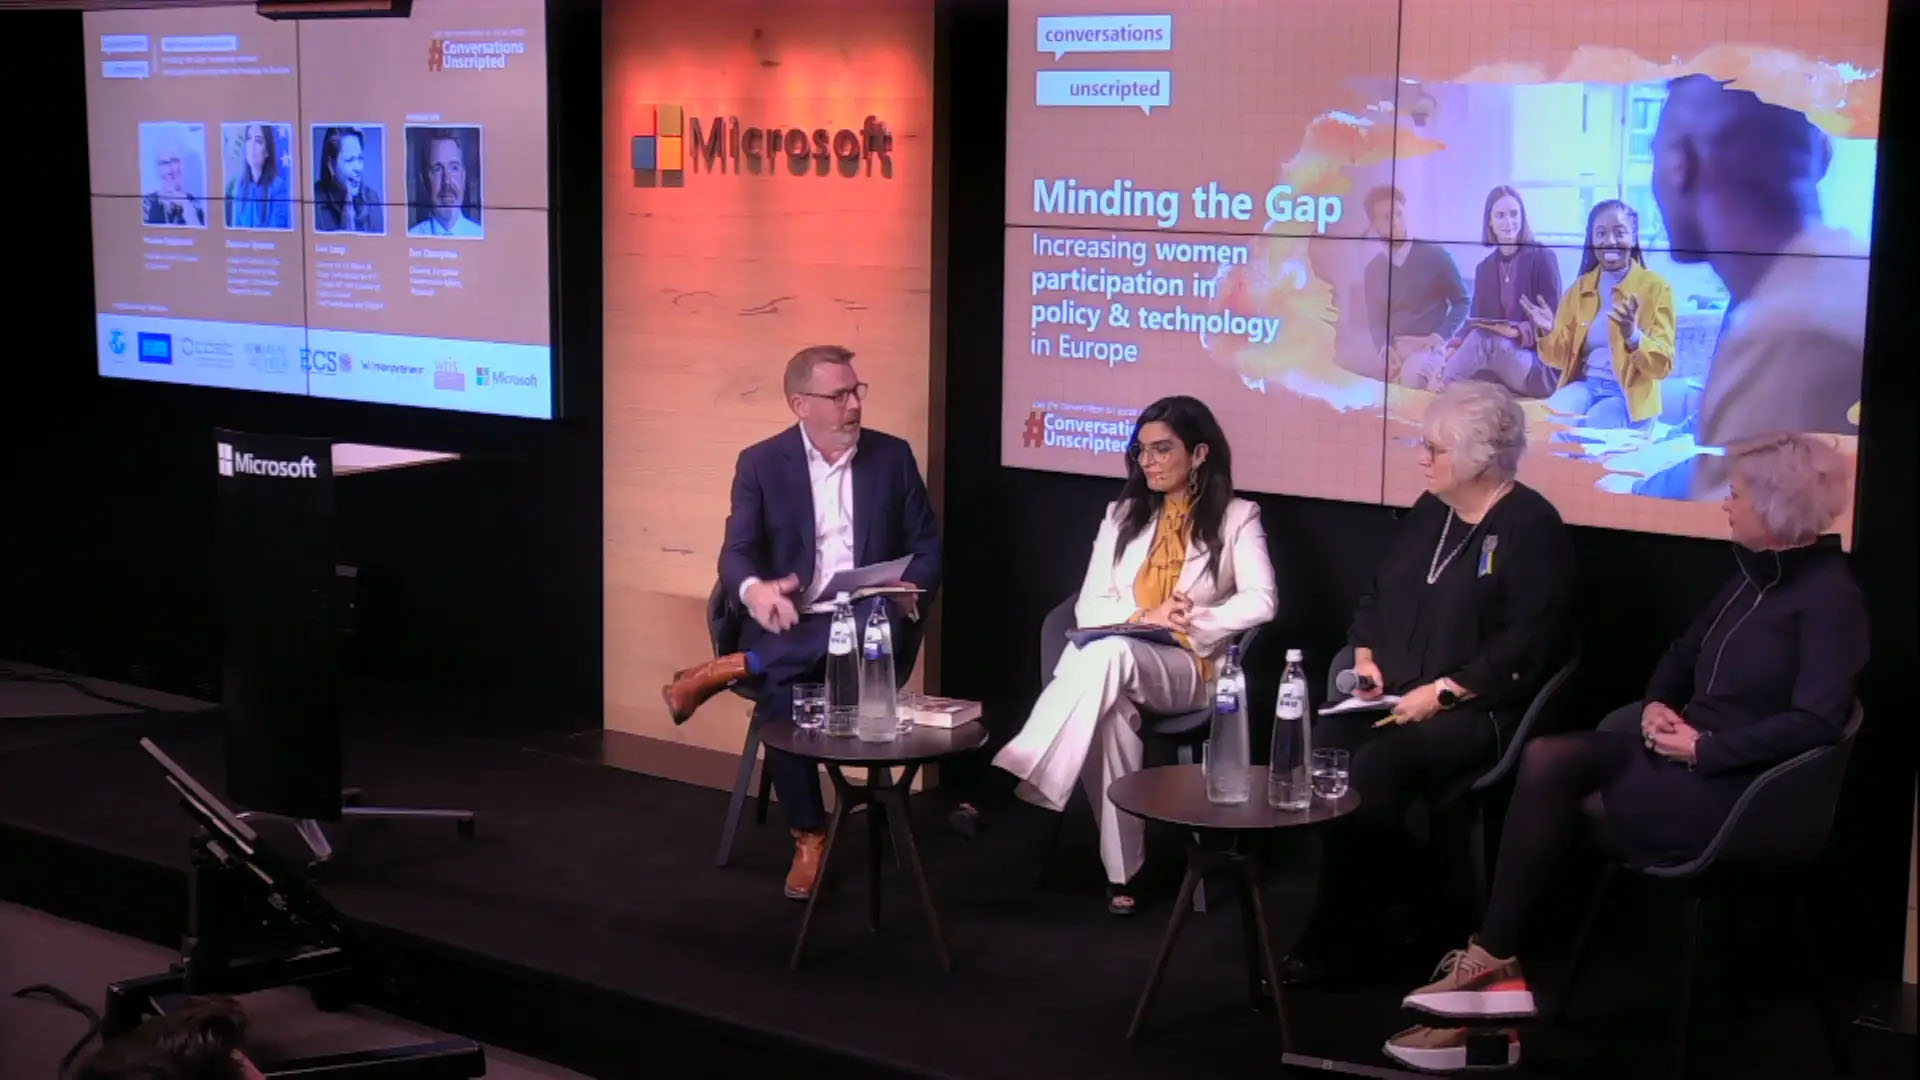 Video Thumbnail: 'Minding the Gap: increasing women participation in policy and technology in Europe' event on October 12th, 2022